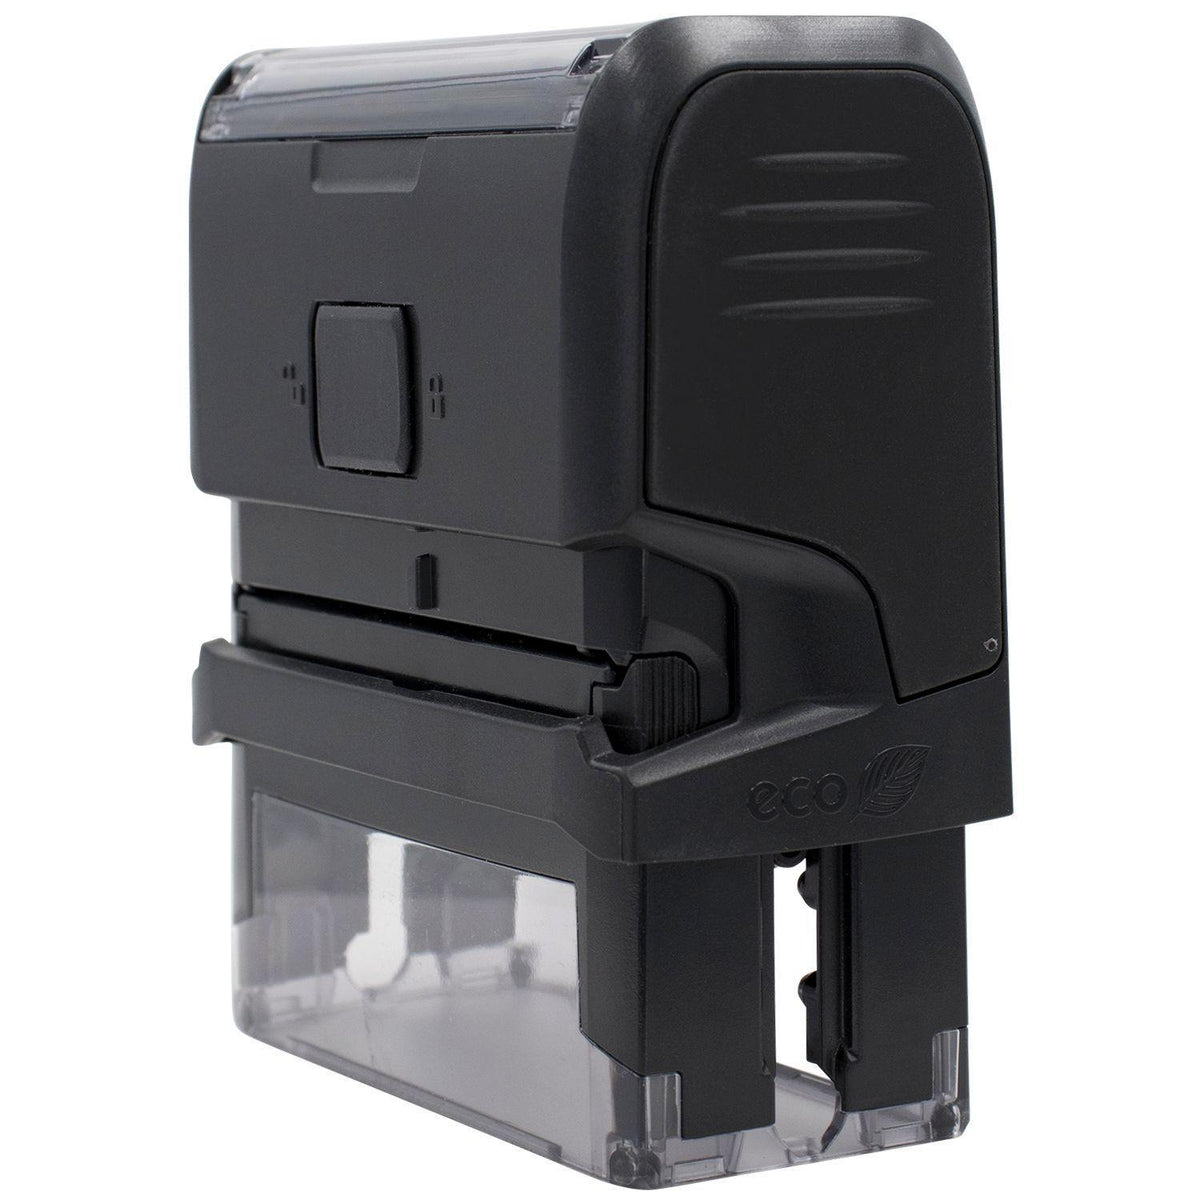 Side View of Large Self-Inking Bold Physical Due Stamp at an Angle